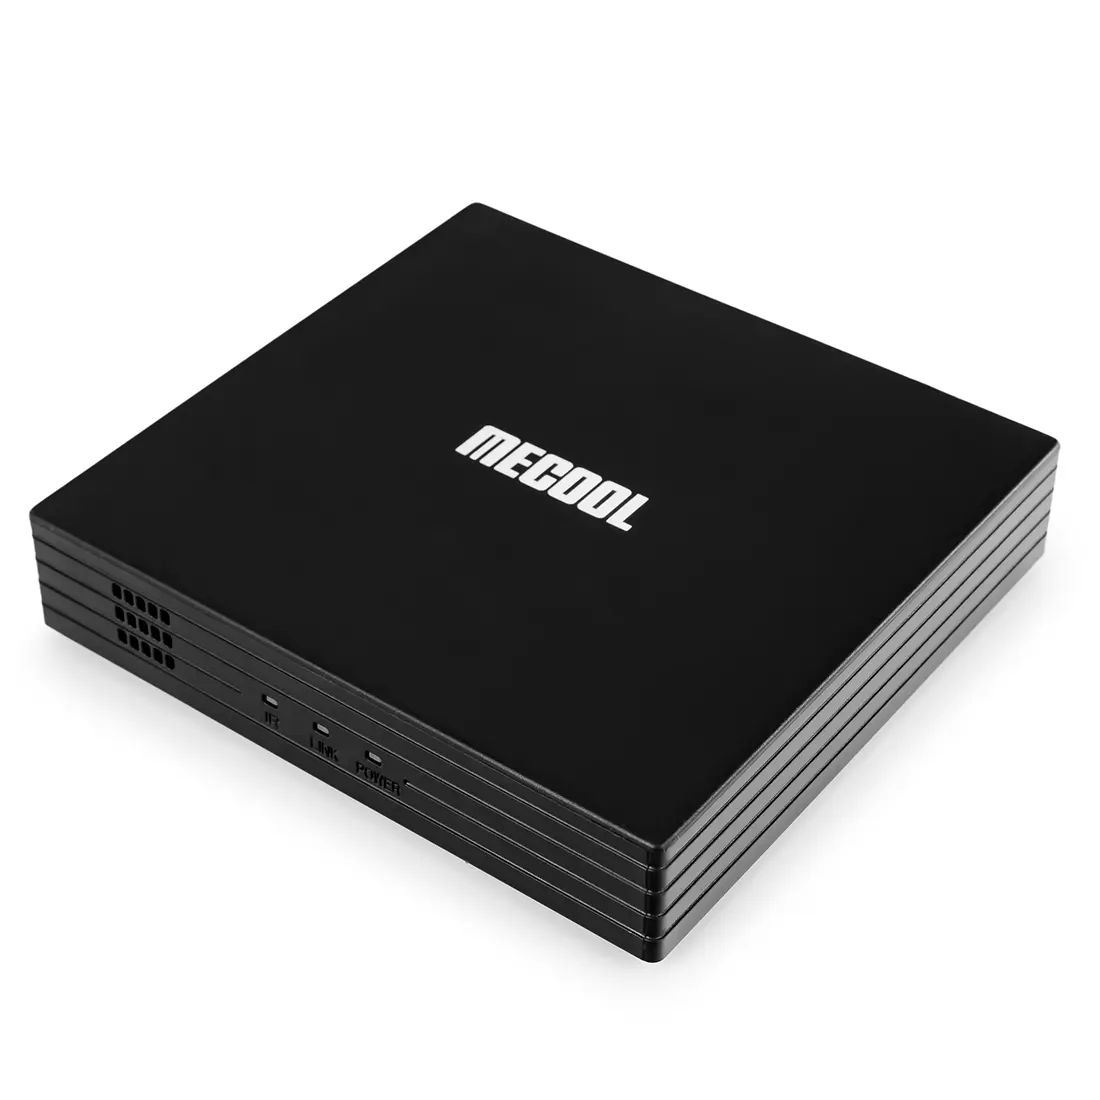 Android TV BOX MECOOL KT1 DVB-S2X 4K Android 10 WiFi z tunerem SAT